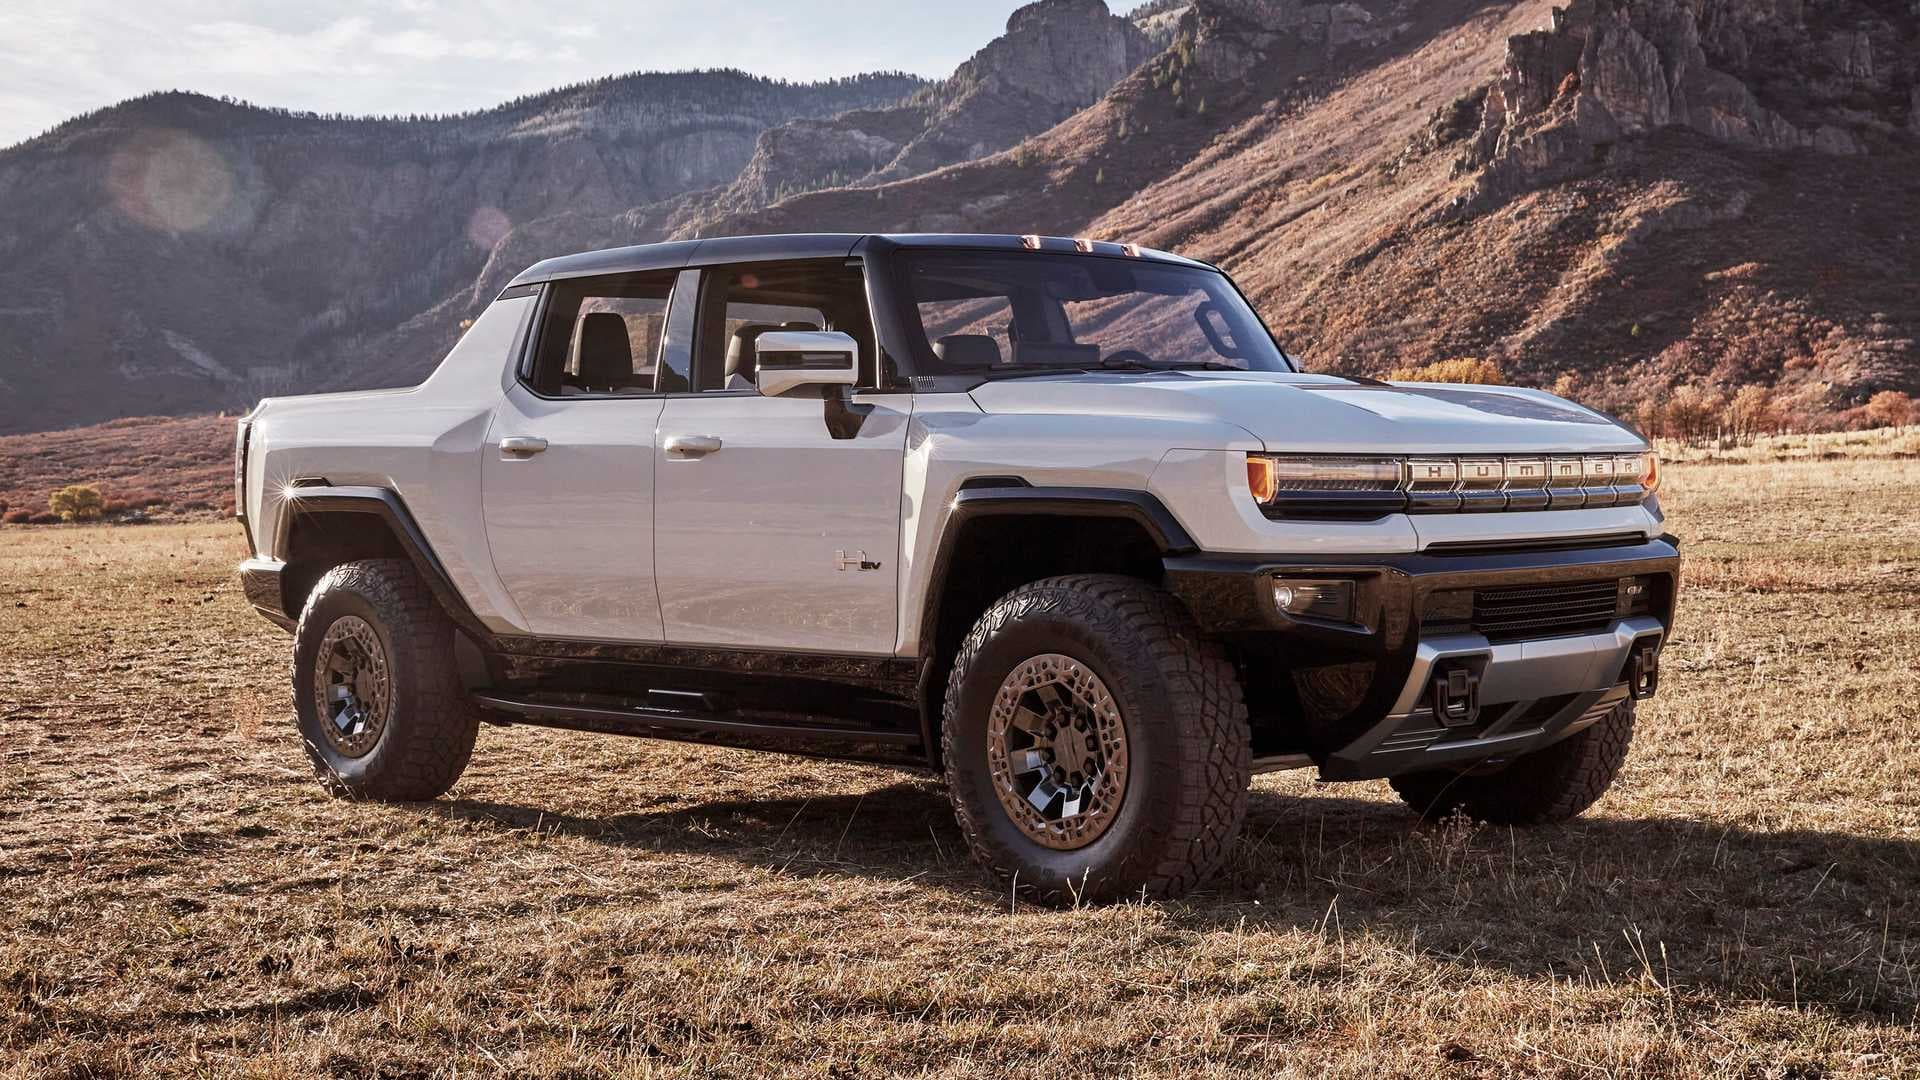 The 2022 GMC Hummer EV’s Battery Alone Weighs 2,923 Pounds